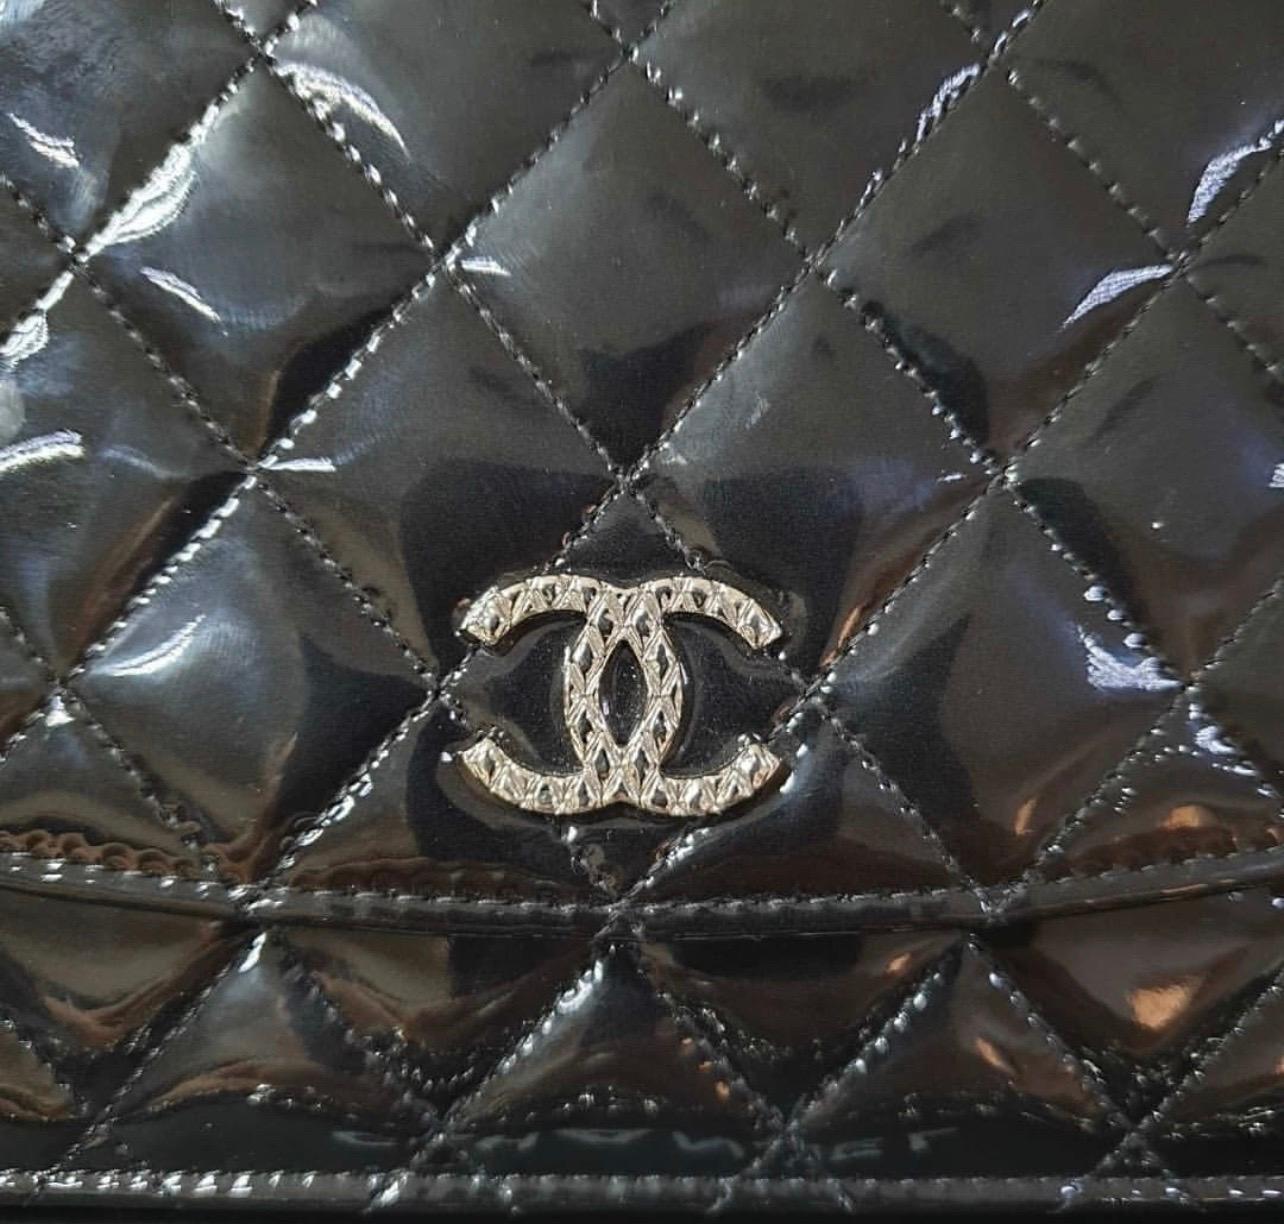 Black Chanel CC Timeless Patent Leather Wallet on Chain.
This wallet on chain features a quilted patent leather body, a leather woven chain strap, a front flap with a magnetic closure, and interior zip and slip compartments.
5.5